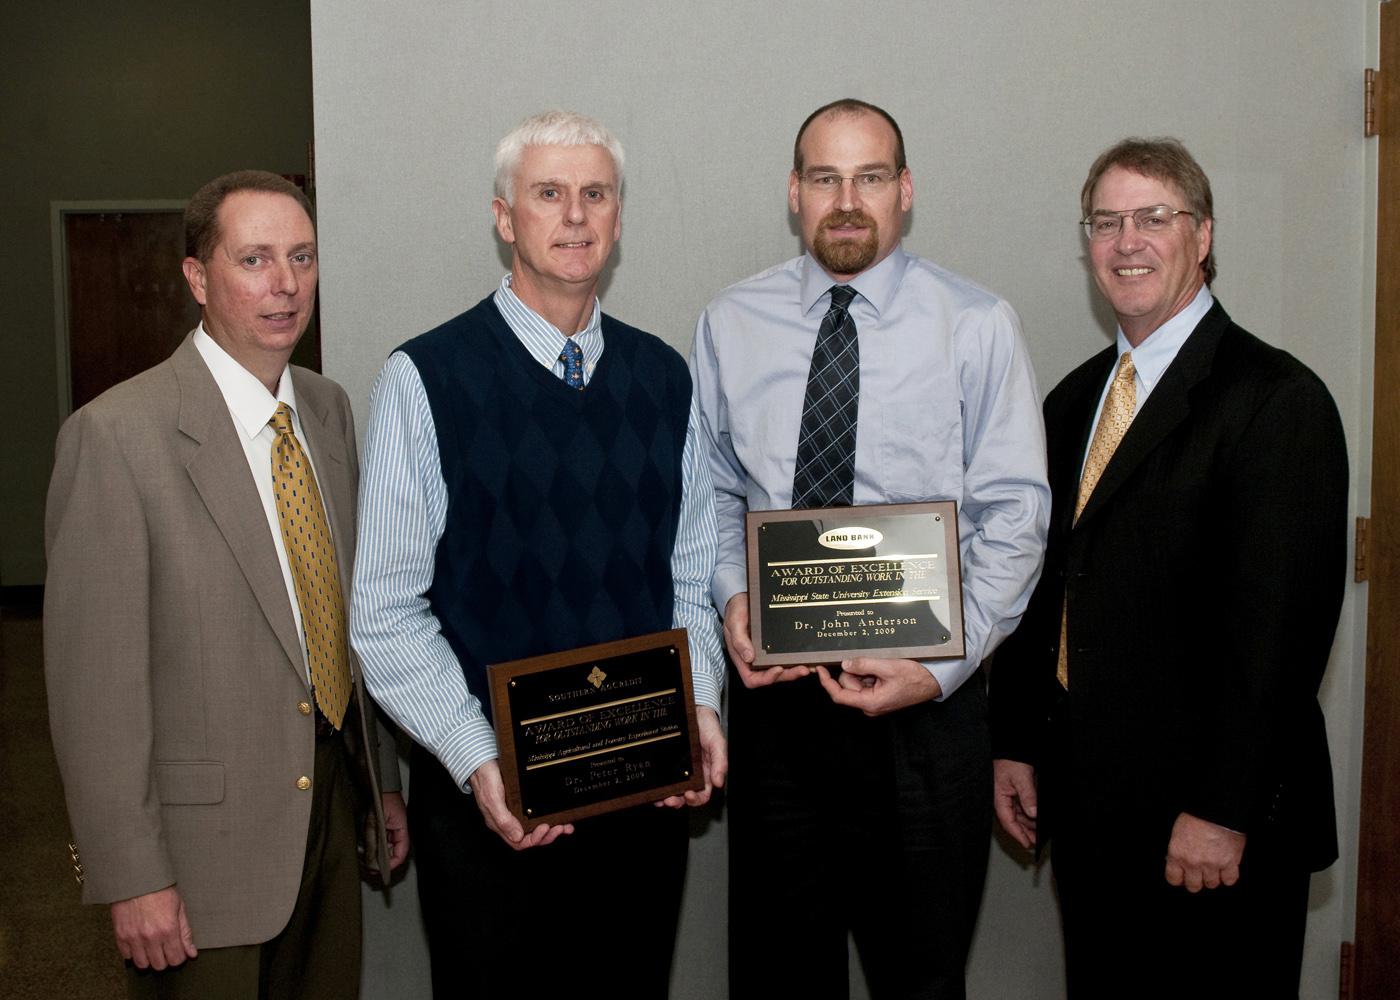 Two Mississippi State University agricultural division employees were recently honored for service and career achievement. From left are award sponsor representative Michael Barnes of Southern Ag Credit; Peter Ryan, recipient of the 2009 MAFES Excellence in Research Award; John Anderson, recipient of the 2009 Outstanding Extension Worker Award; and award sponsor representative Bill Cook of the Land Bank of North Mississippi. (Photo by Scott Corey)